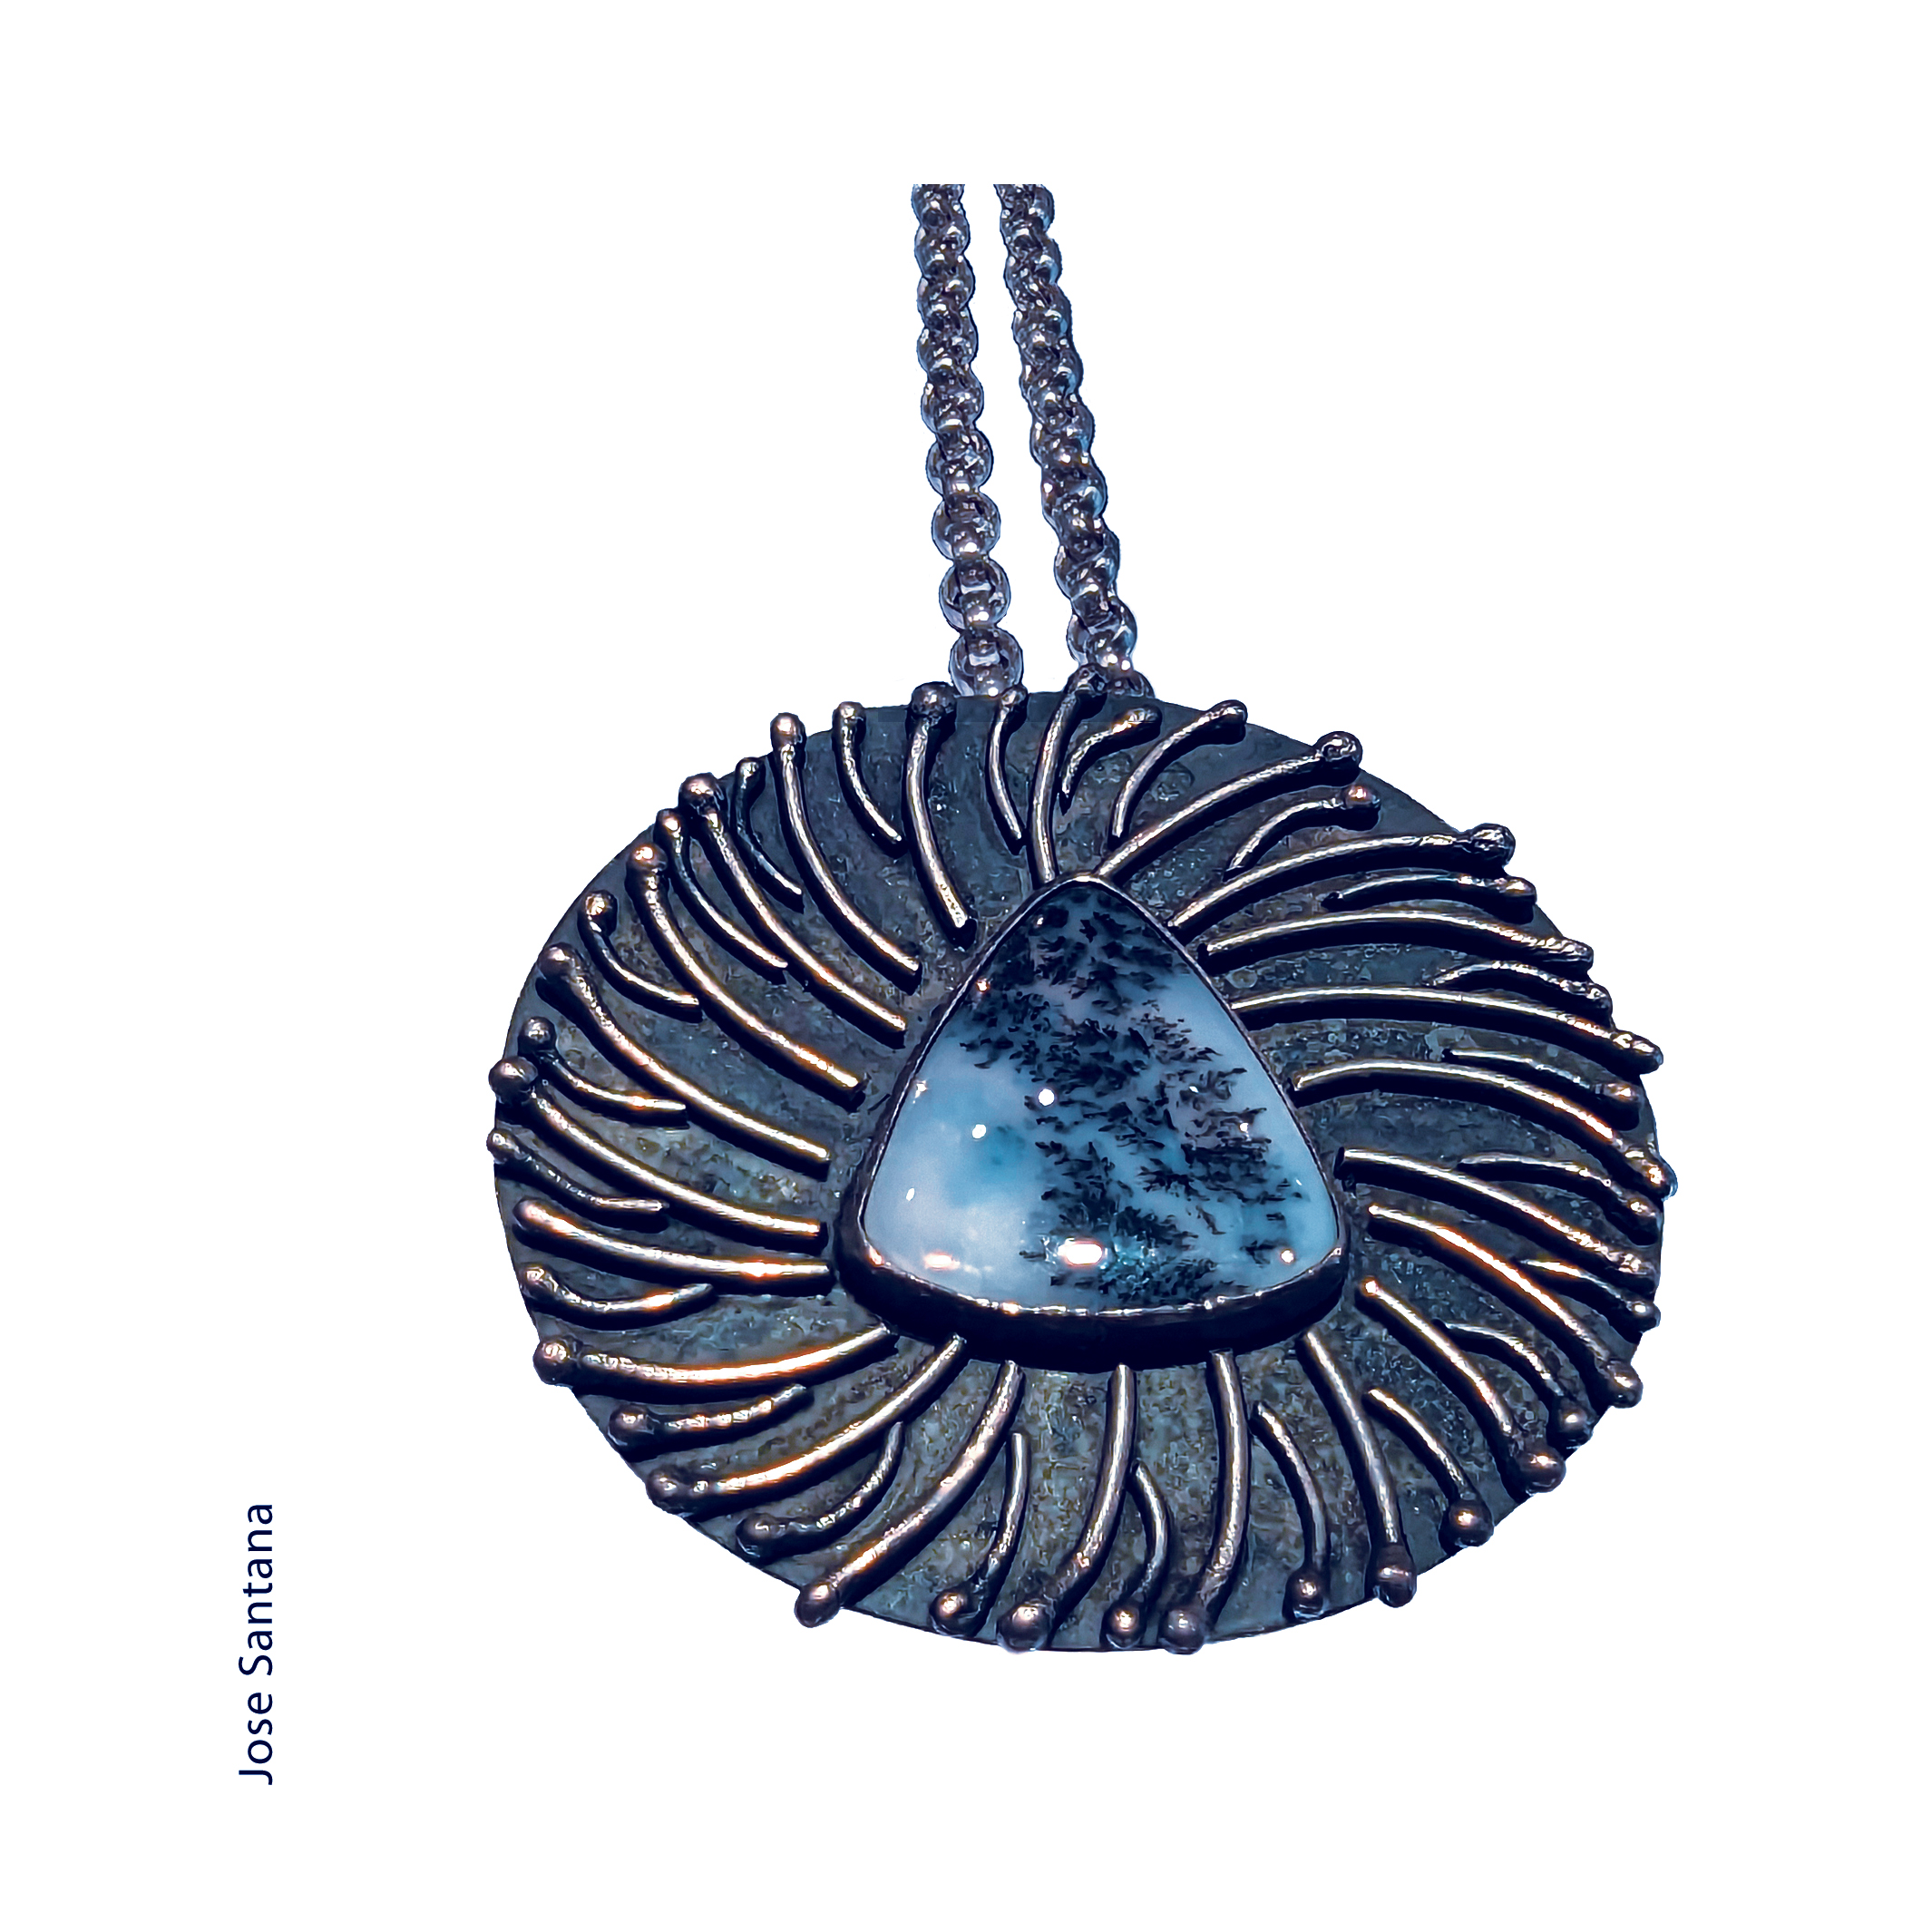 angled view of a sterling silver and agate necklace by Jose Santana. The agaate is blue and white with black fern like inclusions and the pendant has ridges of silver wire that are branch like and end in balled up silver